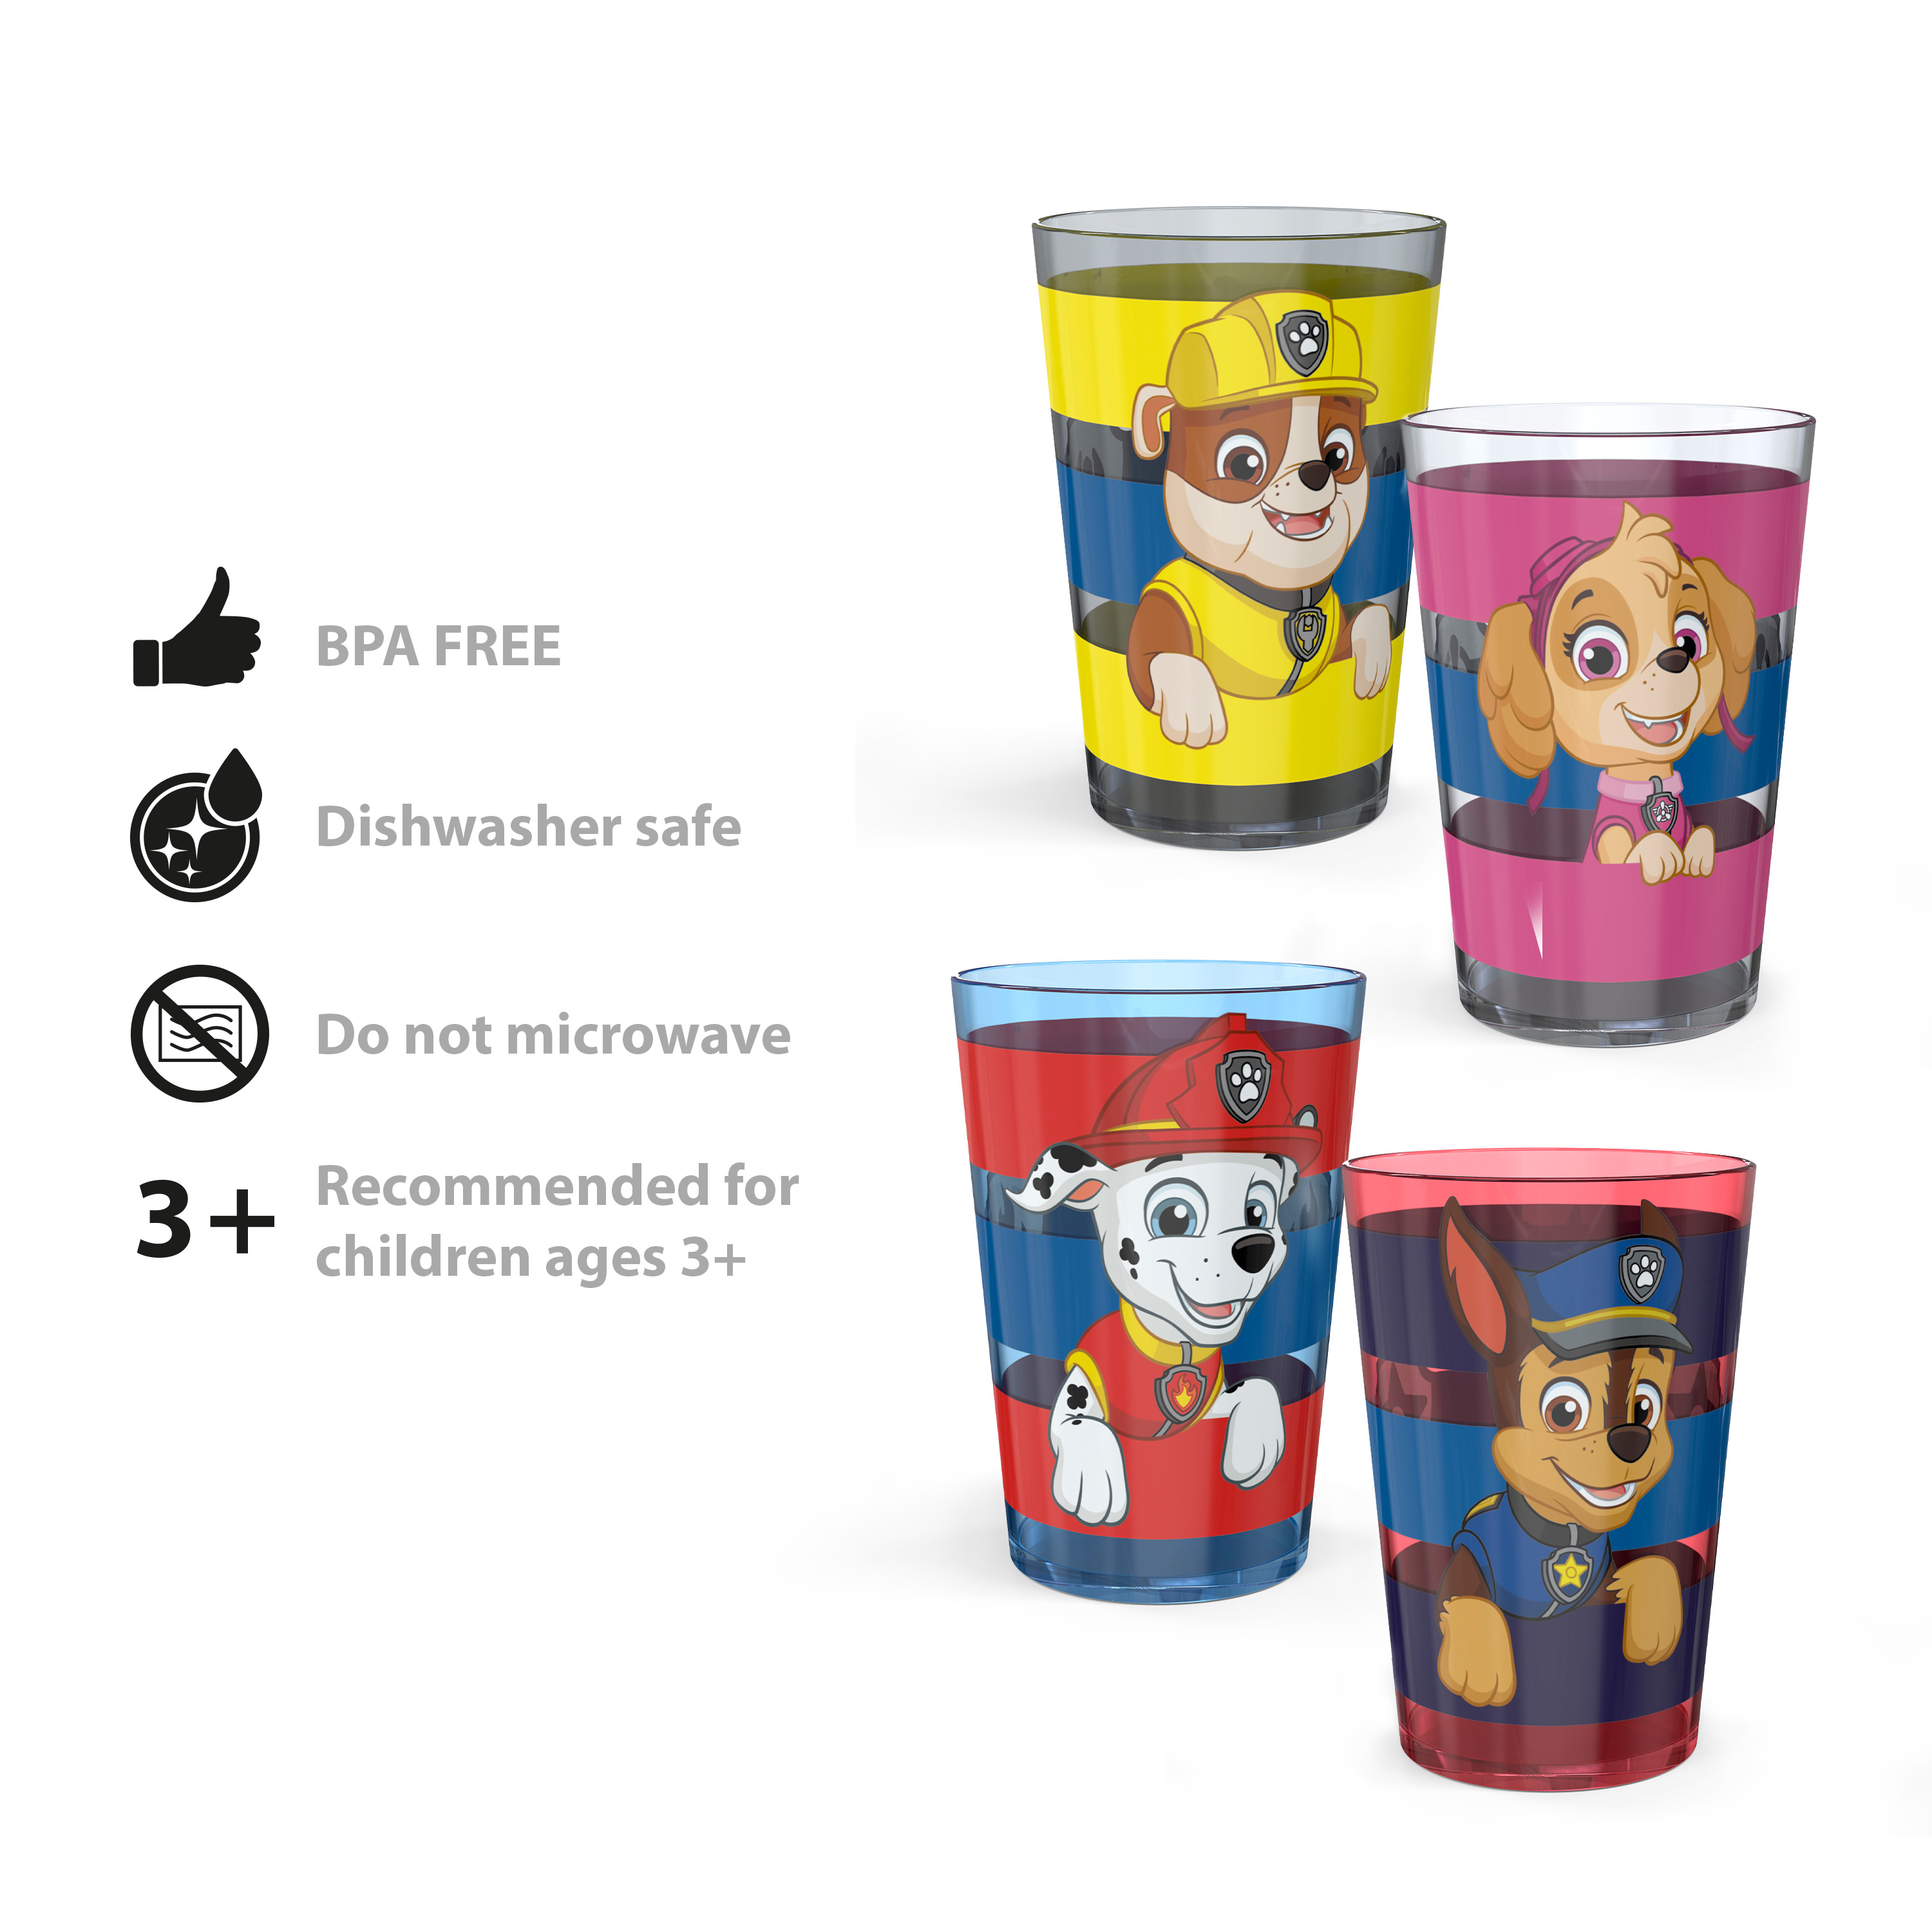 Paw Patrol 14.5 ounce Tumbler, Chase, Skye and Friends, 4-piece set slideshow image 10